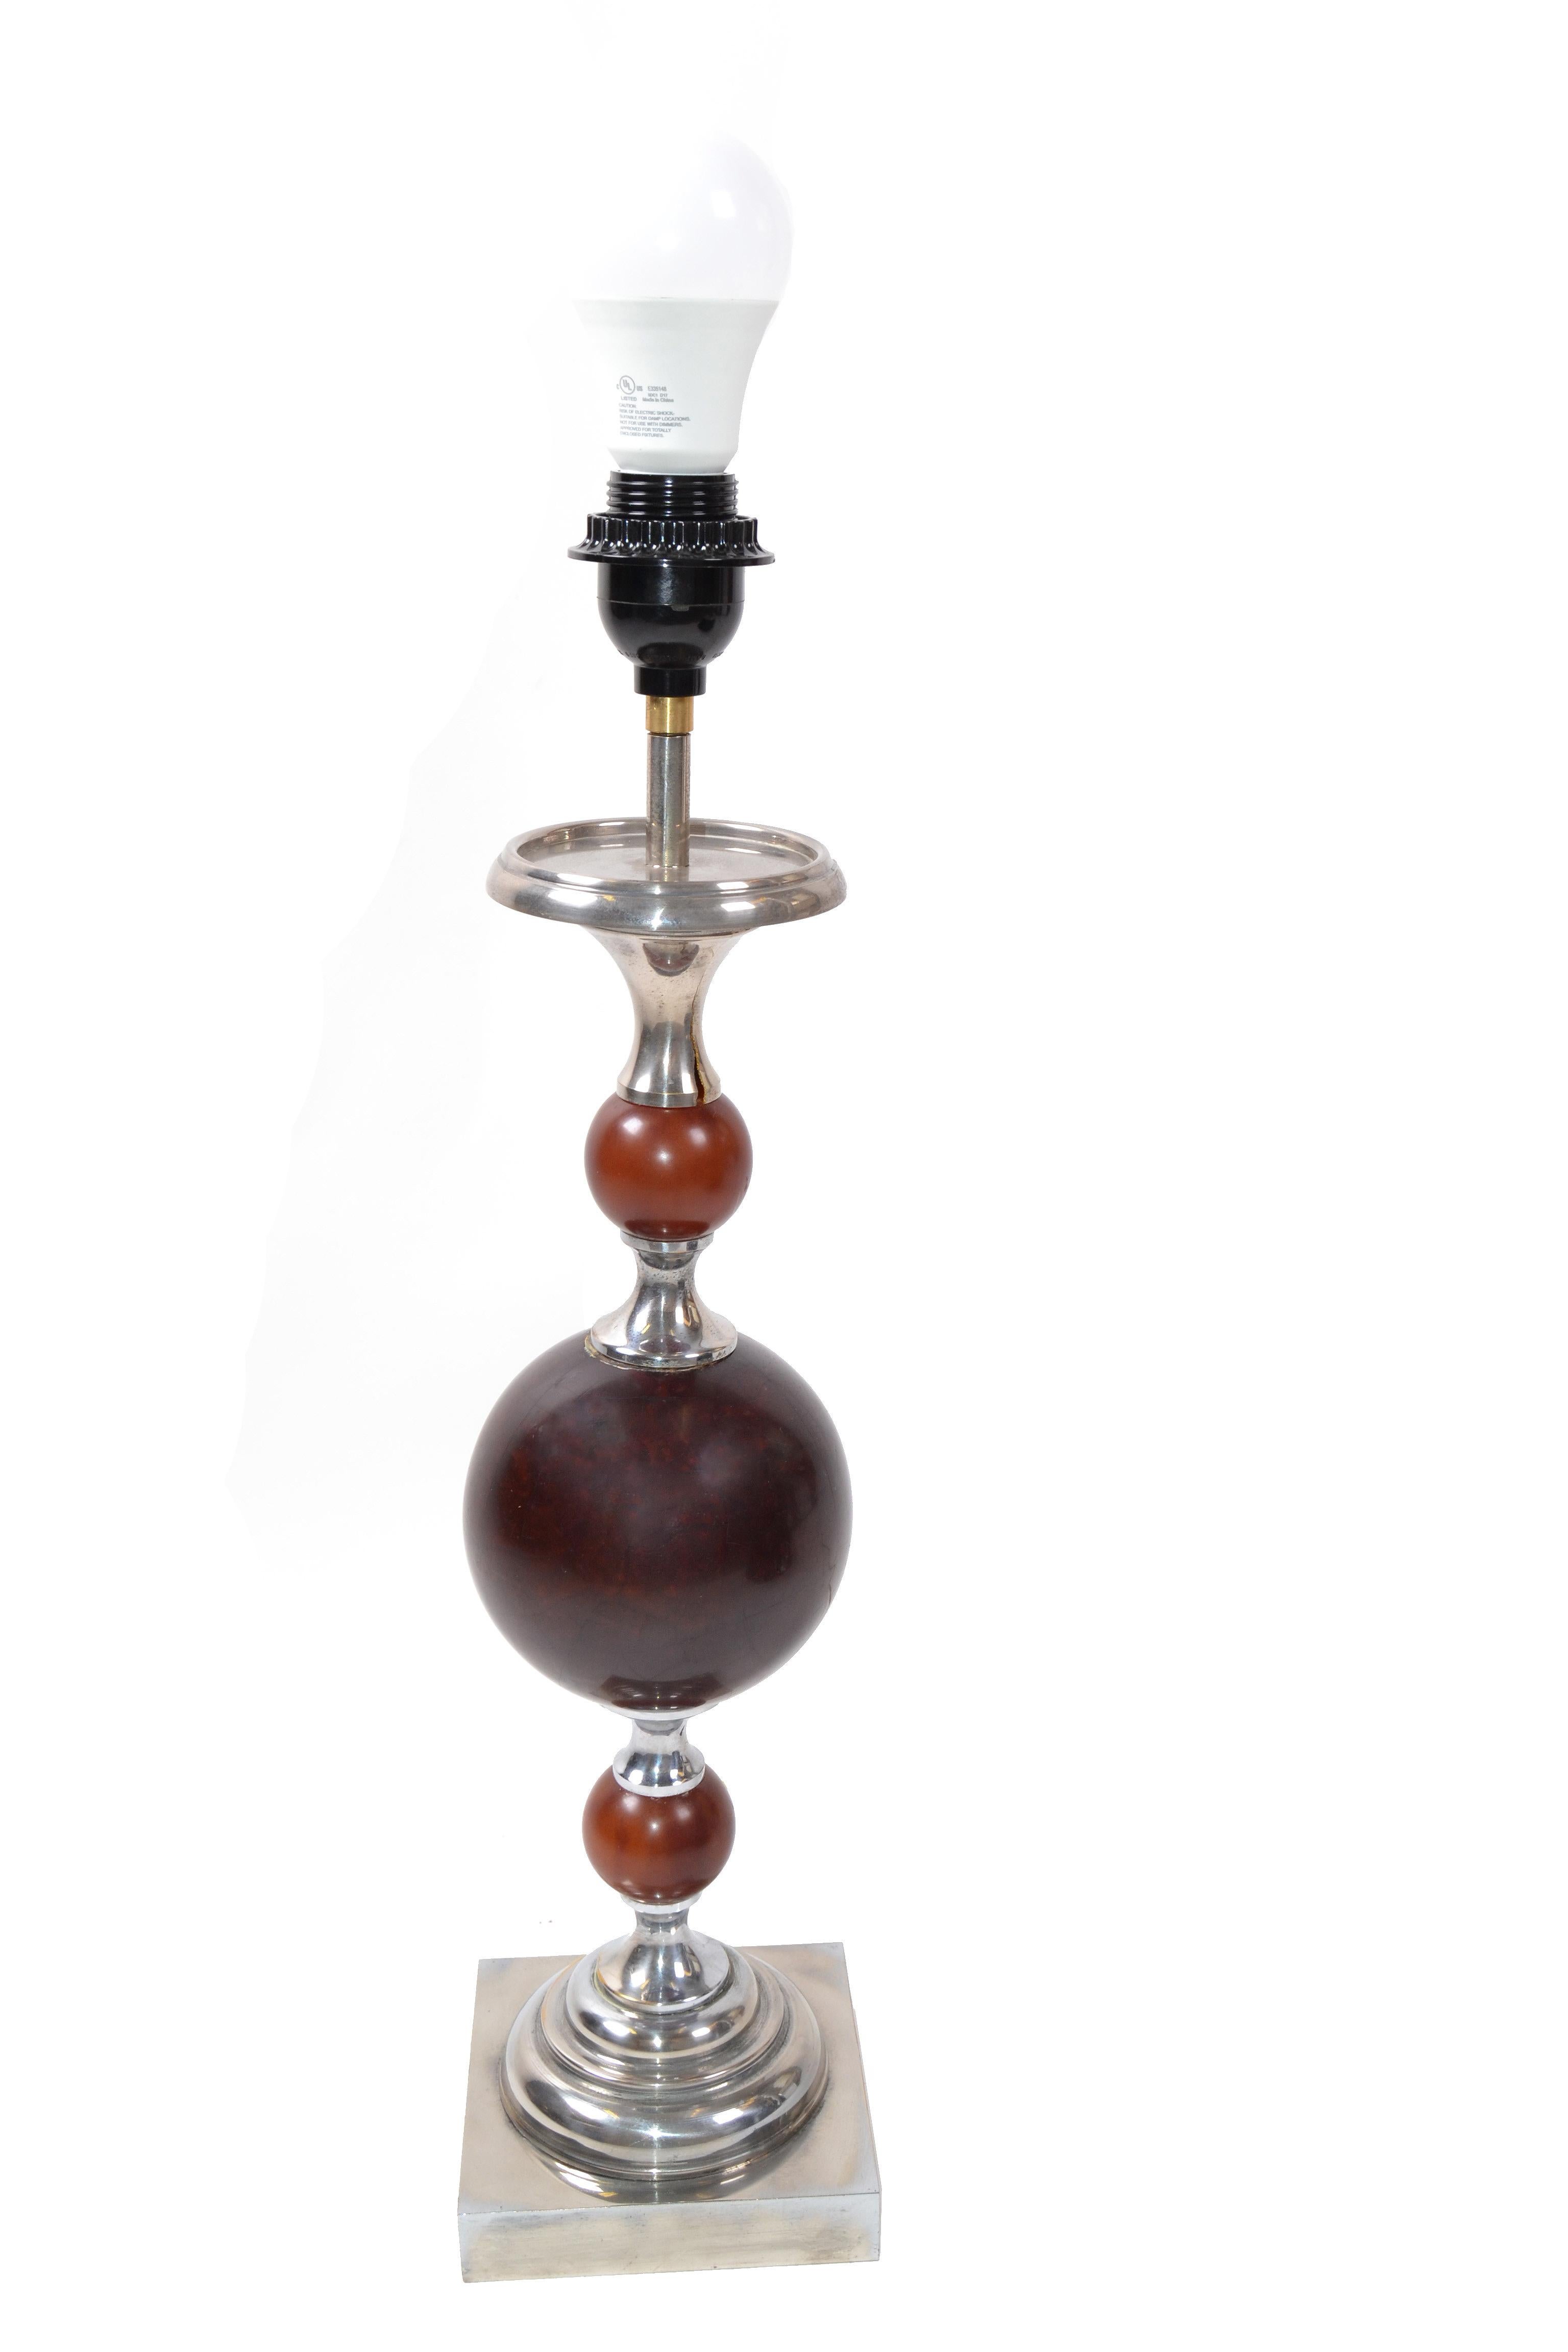 Mid-20th Century Art Deco Maison Charles style French 3 Burgundy Spheres Nickel-Plated Table Lamp For Sale